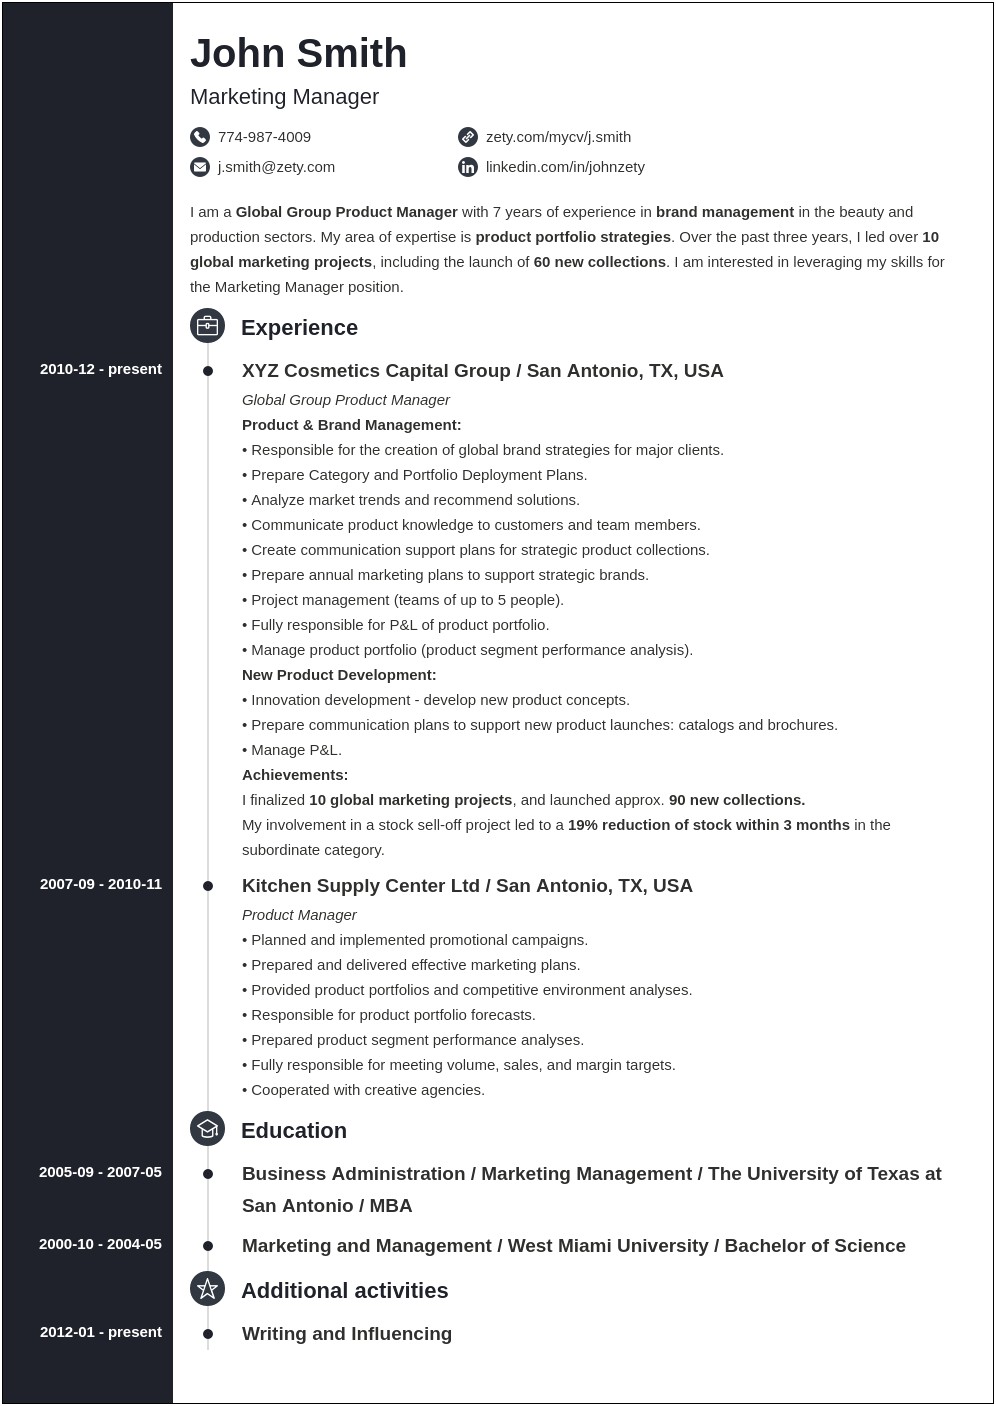 Resume Format Education Or Experience First